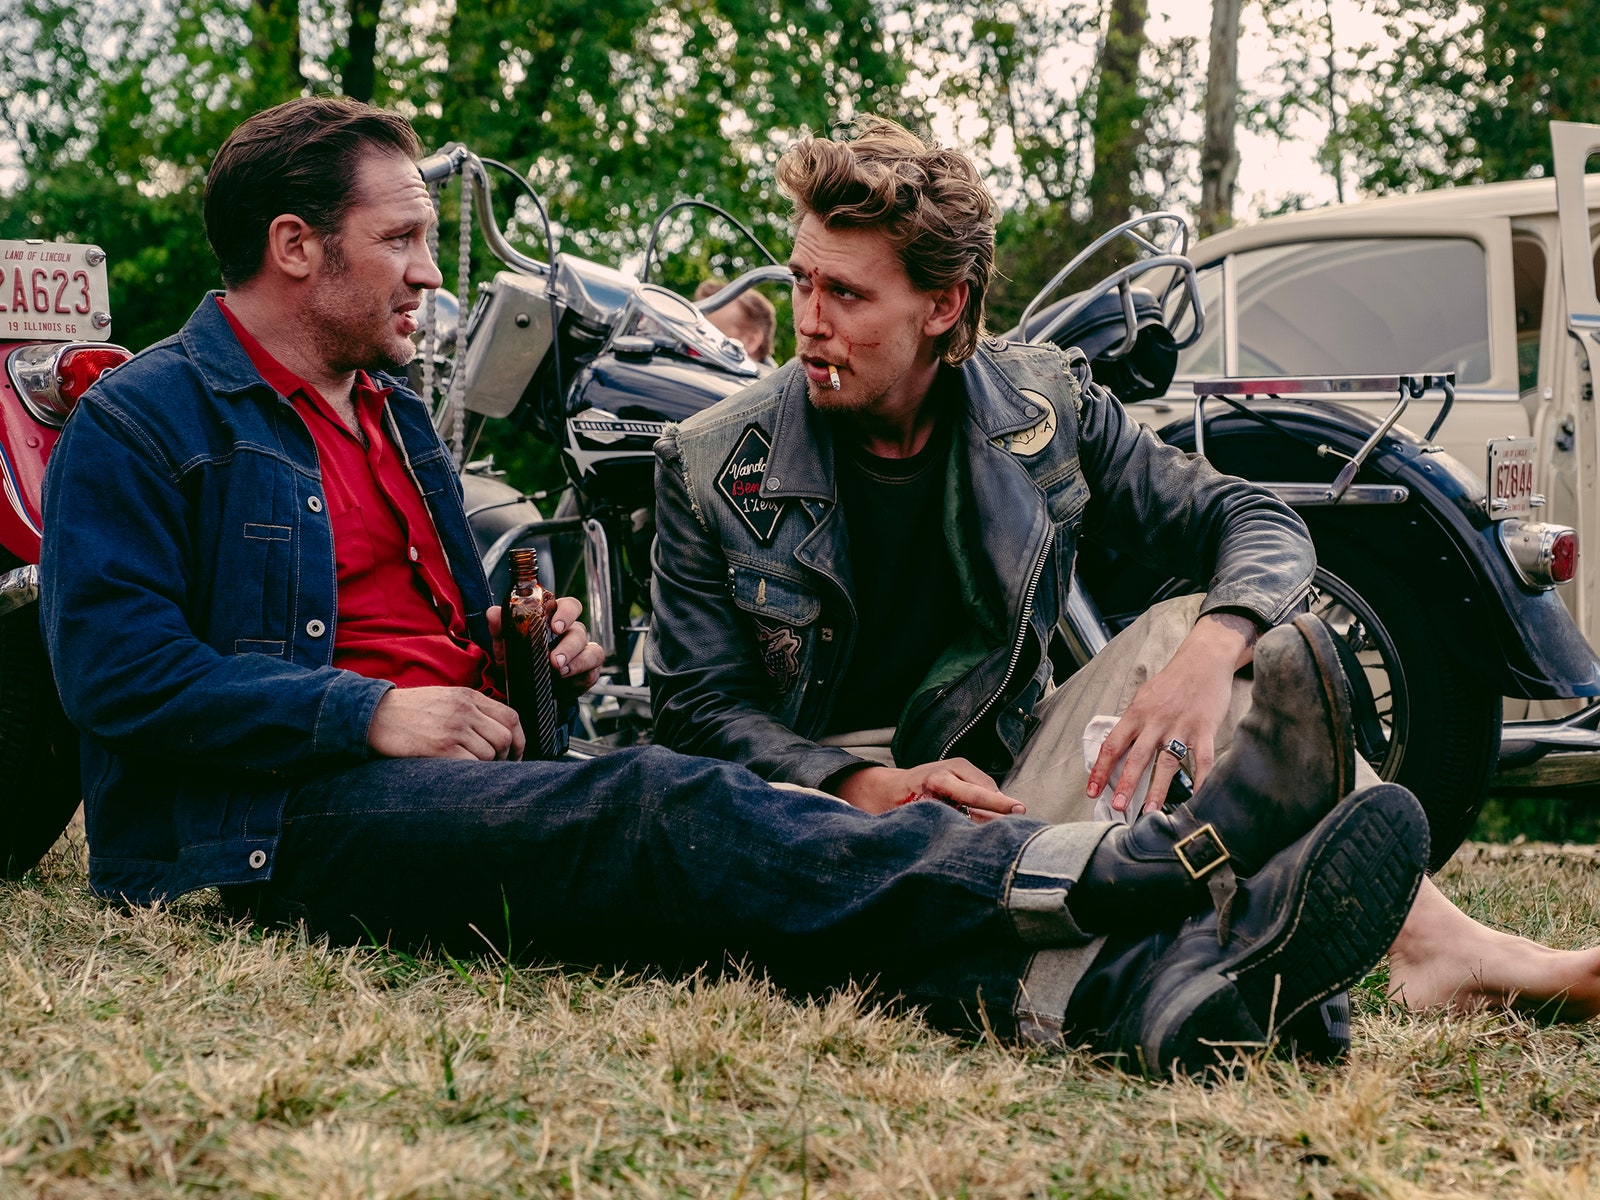 “The Bikeriders” Lends a Wild Bunch a Mythic Grandeur